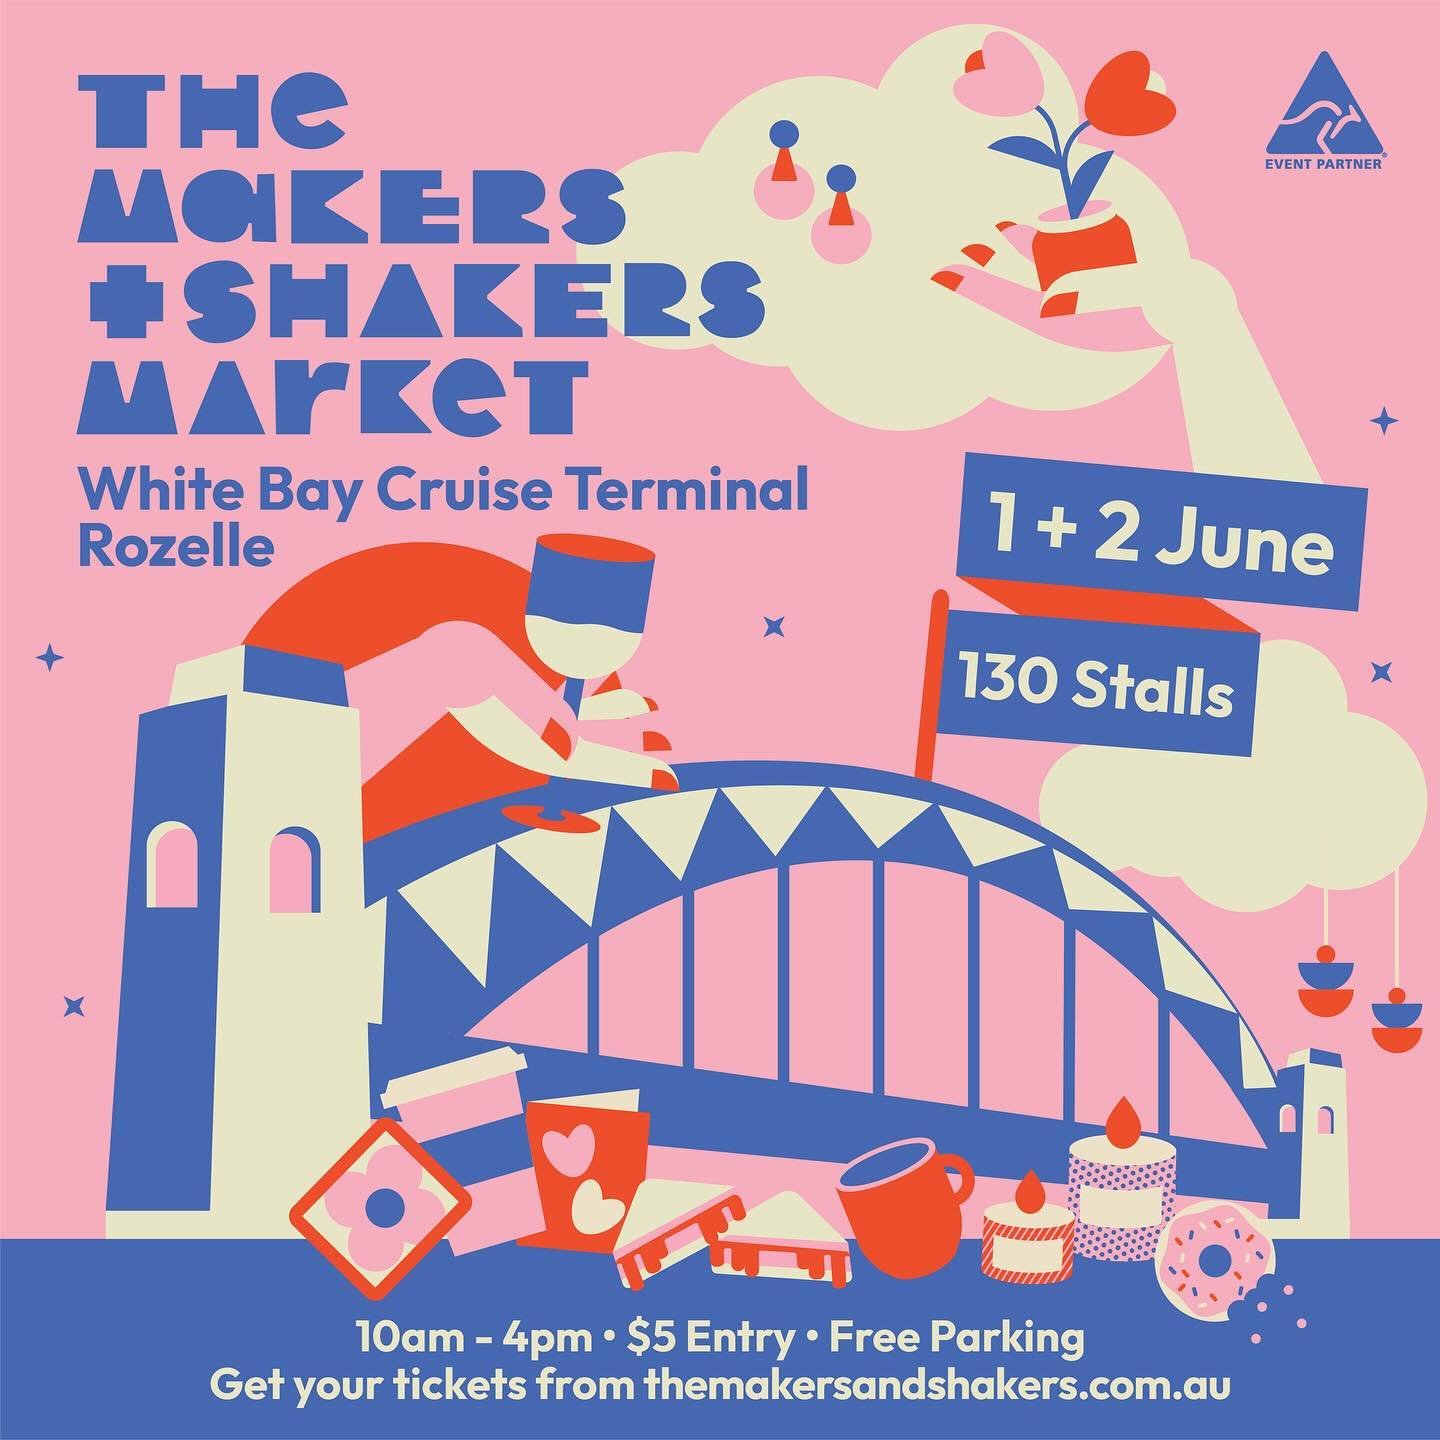 SYDNEY don&rsquo;t miss our favourite local market celebrating Australian made and creativity 🌈

@themakersandshakers is back at White Bay Cruise Terminal in Rozelle ✨

The market features 130 stalls of Australian handmade homewares, food and ethica